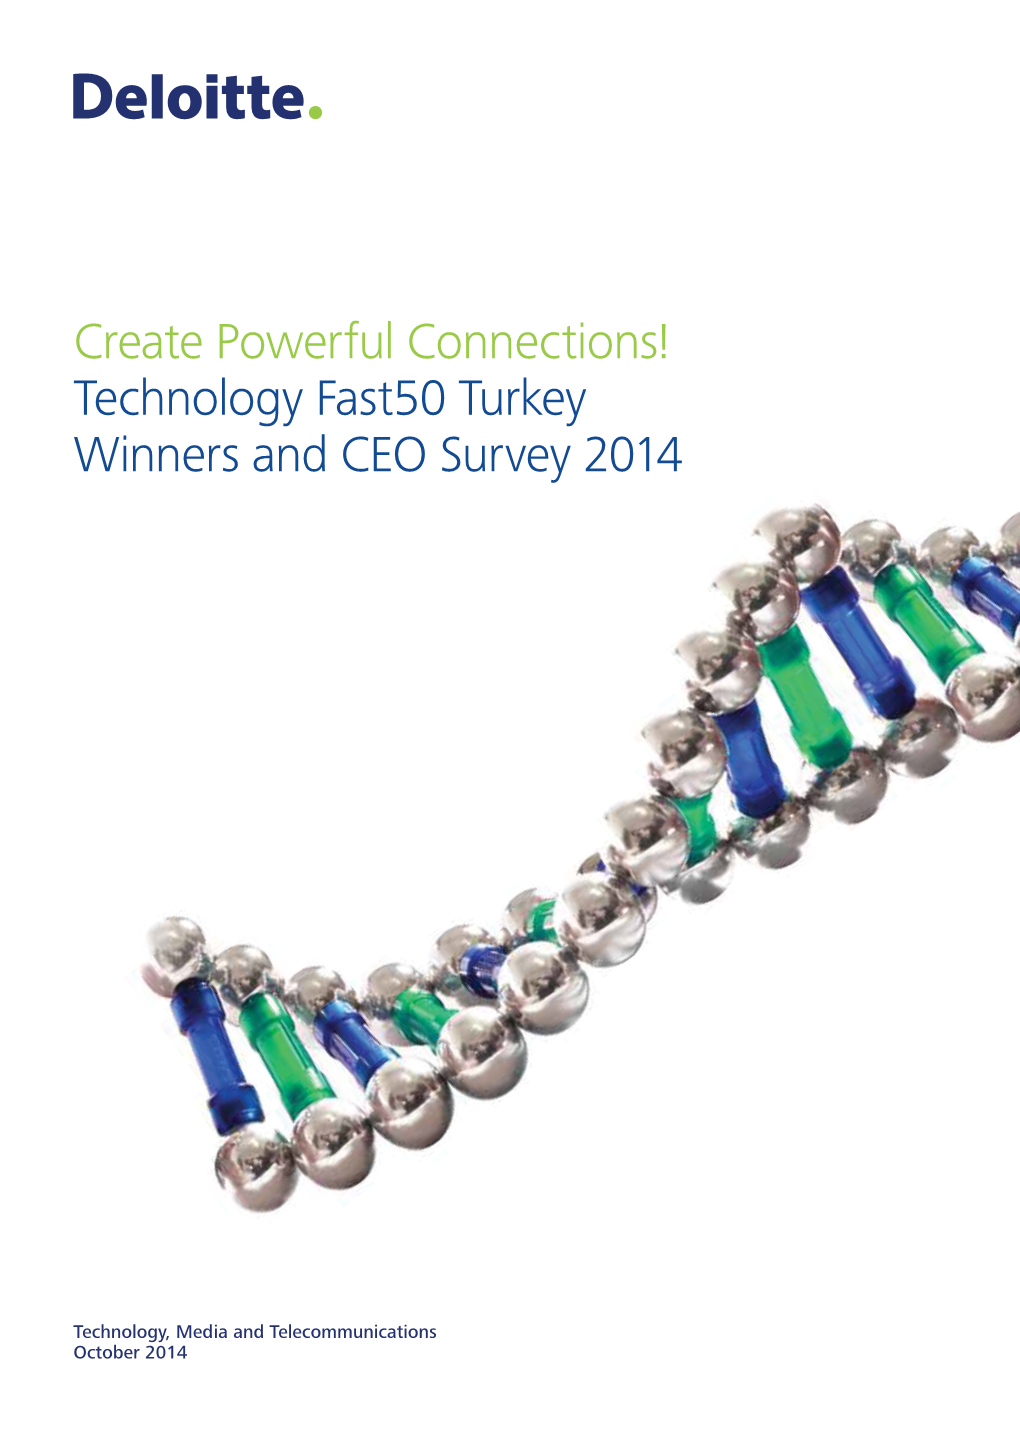 Technology Fast50 Turkey Winners and CEO Survey 2014